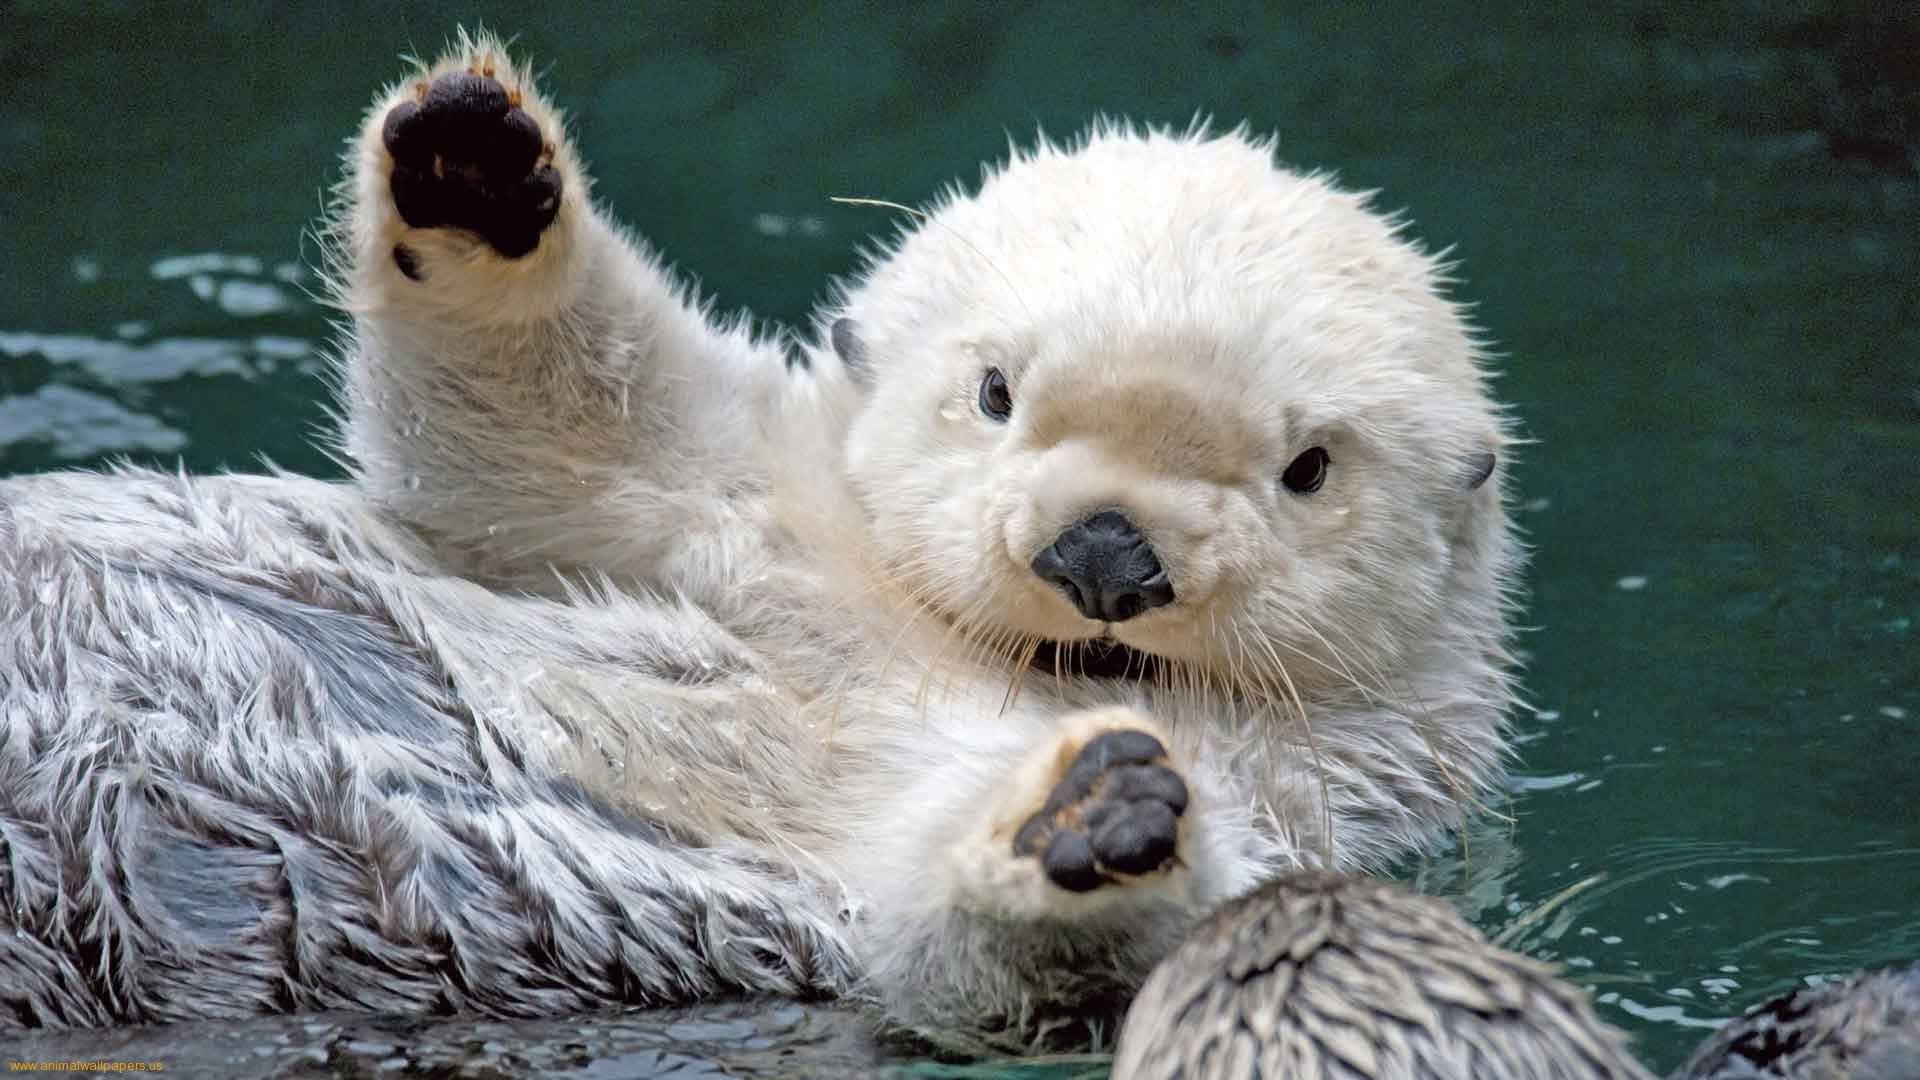 Otterly Gentle – Some Spirited and magnificent details